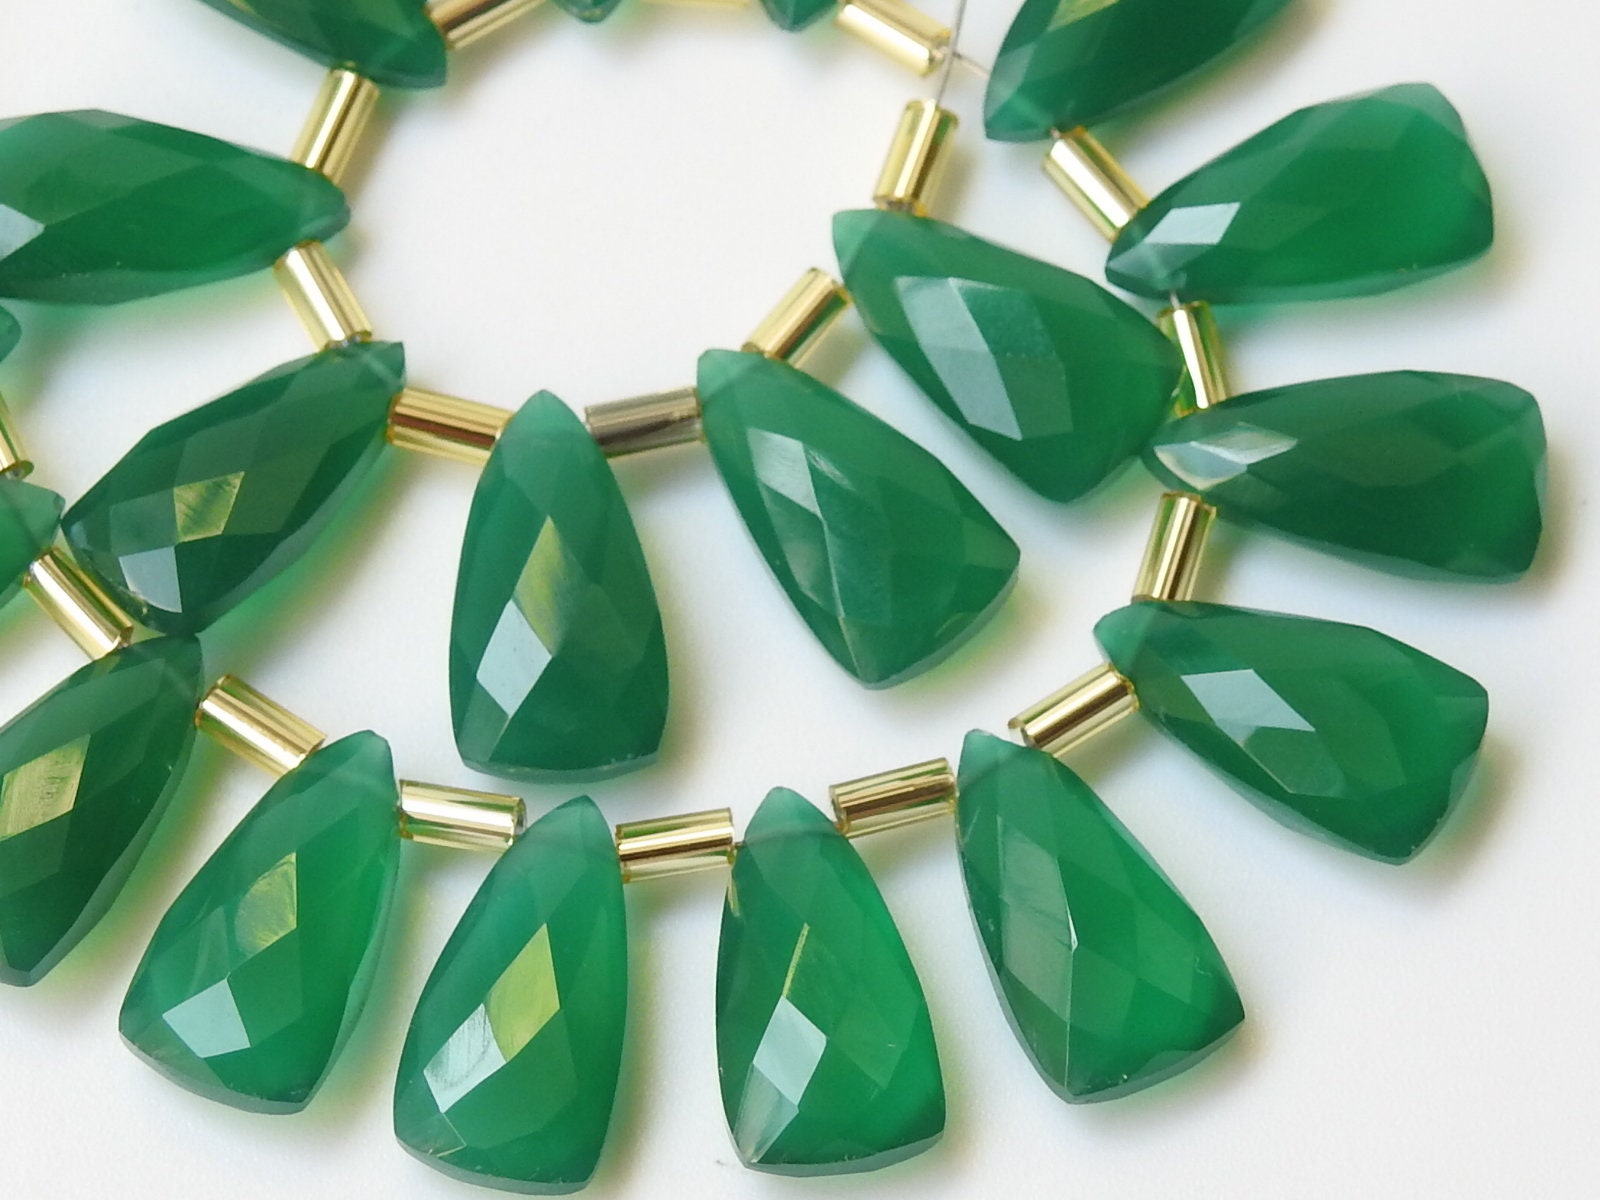 15X8 MM Pair Green Onyx Faceted Pyramid Shape Briolette Wholesale Price New Arrival (pme)CY1 | Save 33% - Rajasthan Living 13